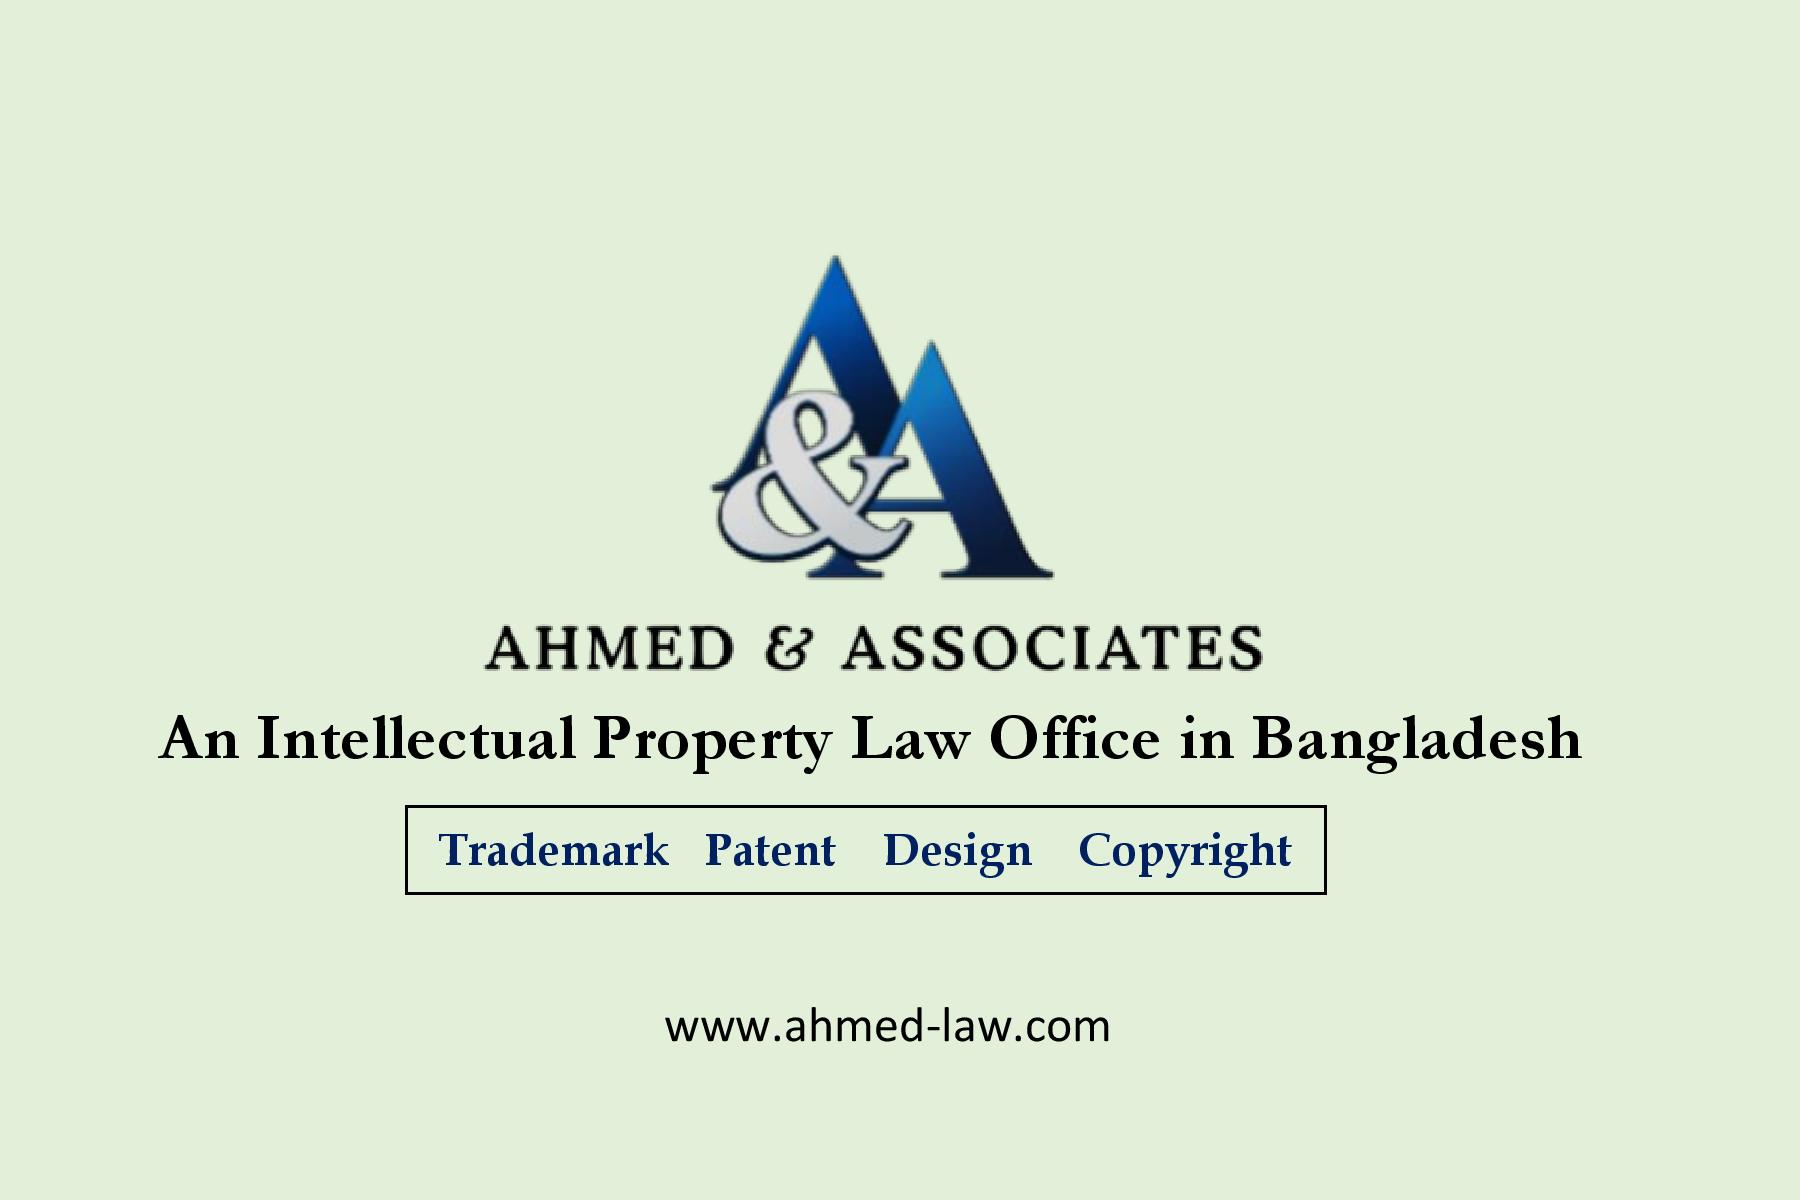 Ahmed and Associates